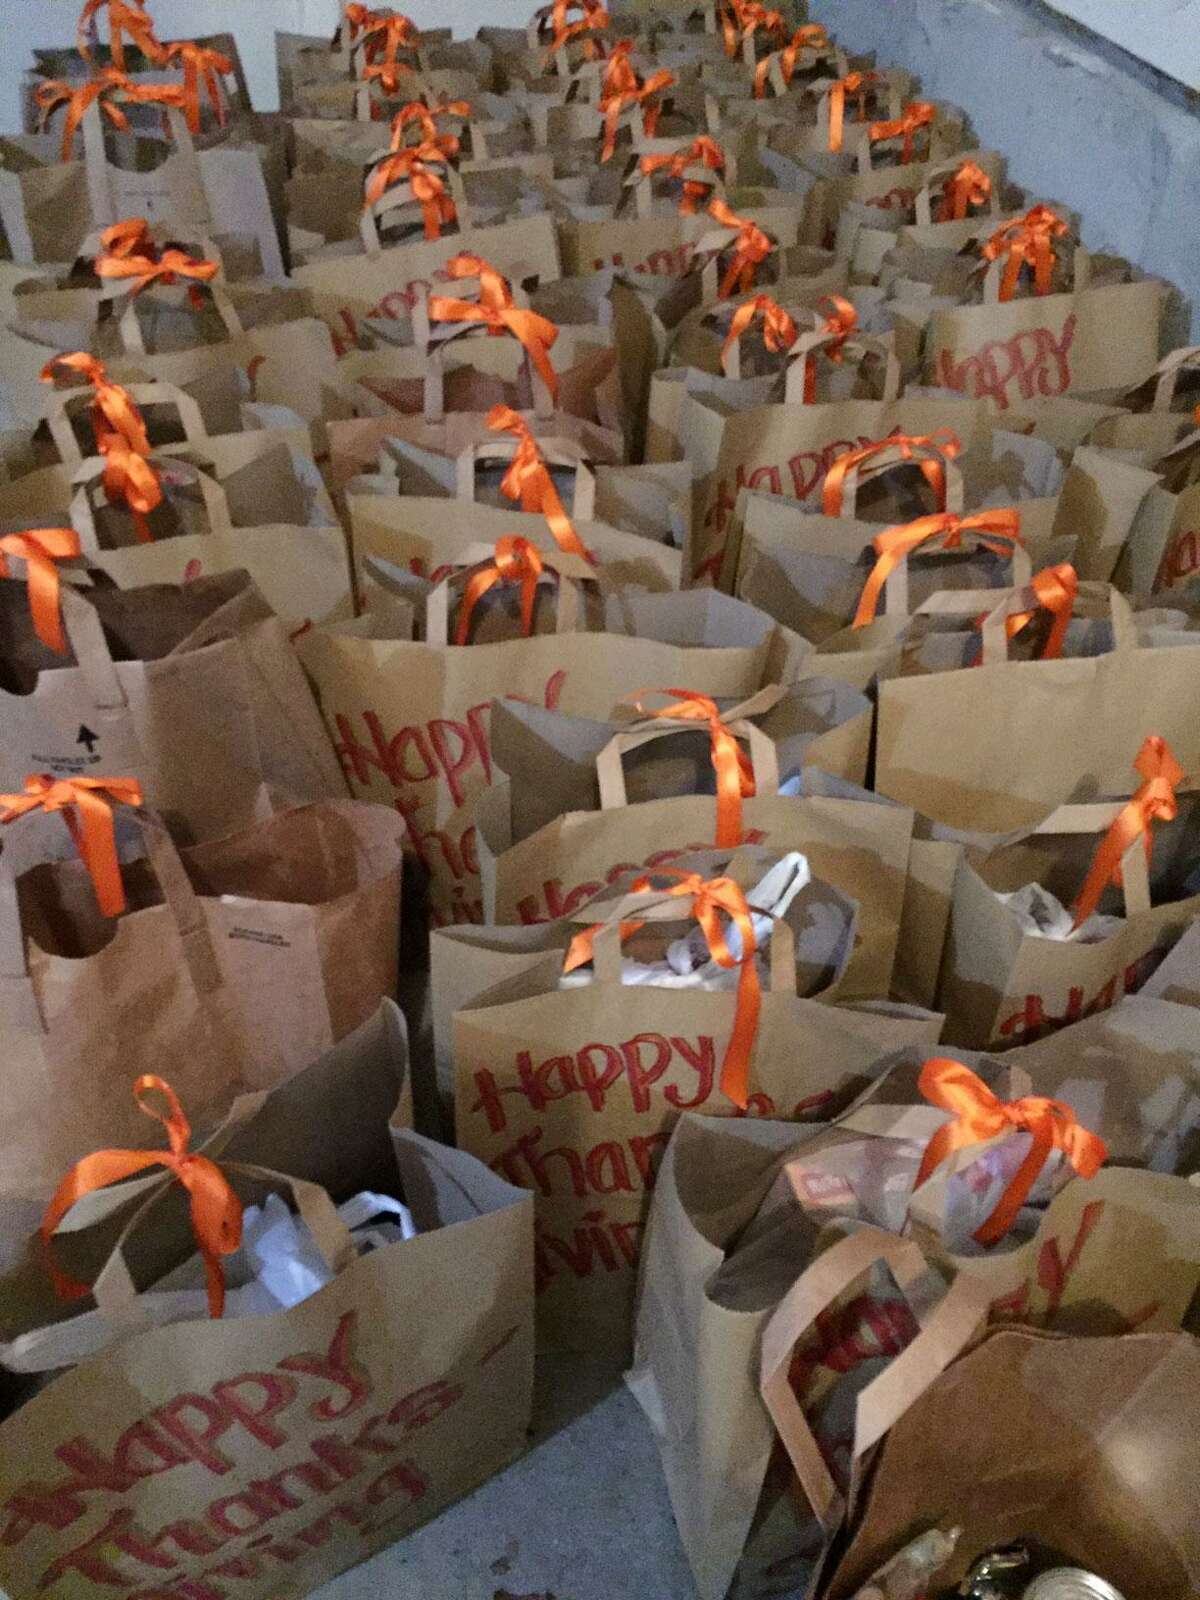 Toni Boucher of Wilton has collected 400 bags of Thanksgiving side dish fixings to go along with 500 donated turkeys, and needs 100 more by Saturday, Nov. 21, to meet her goal.